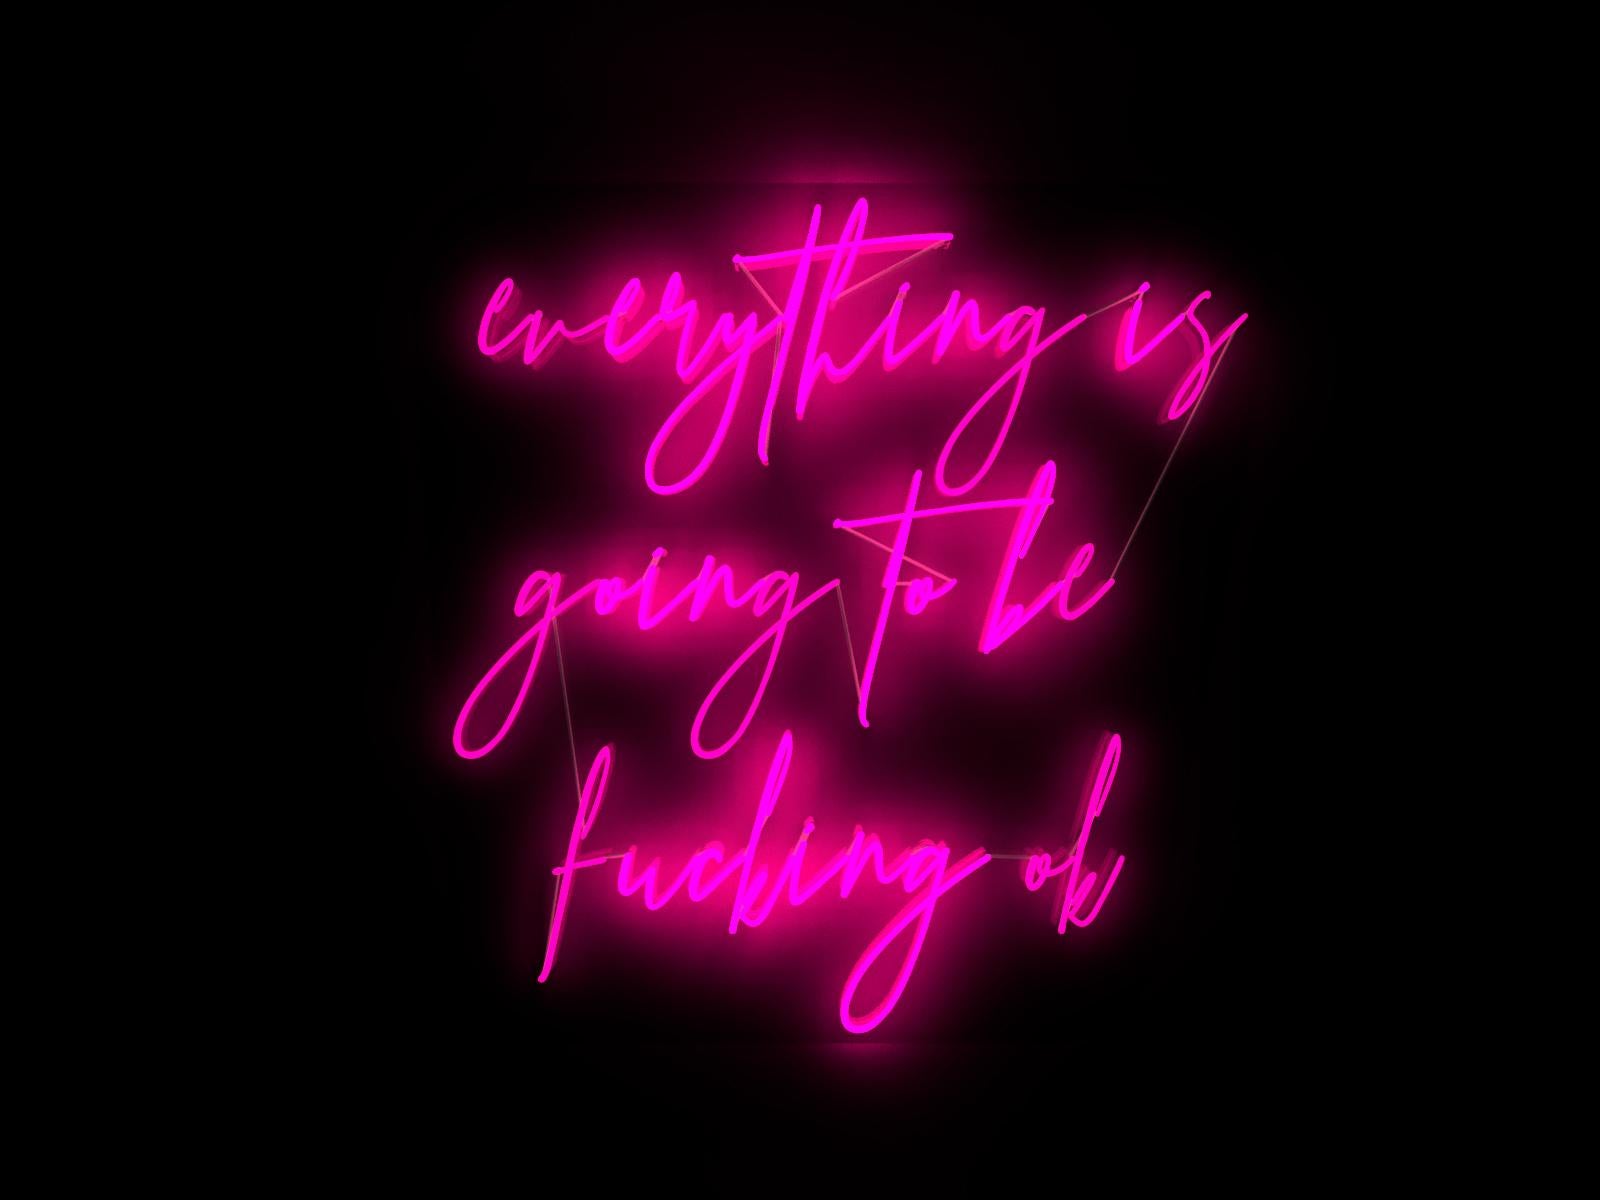 Everything is going to be fucking ok  - neon art work